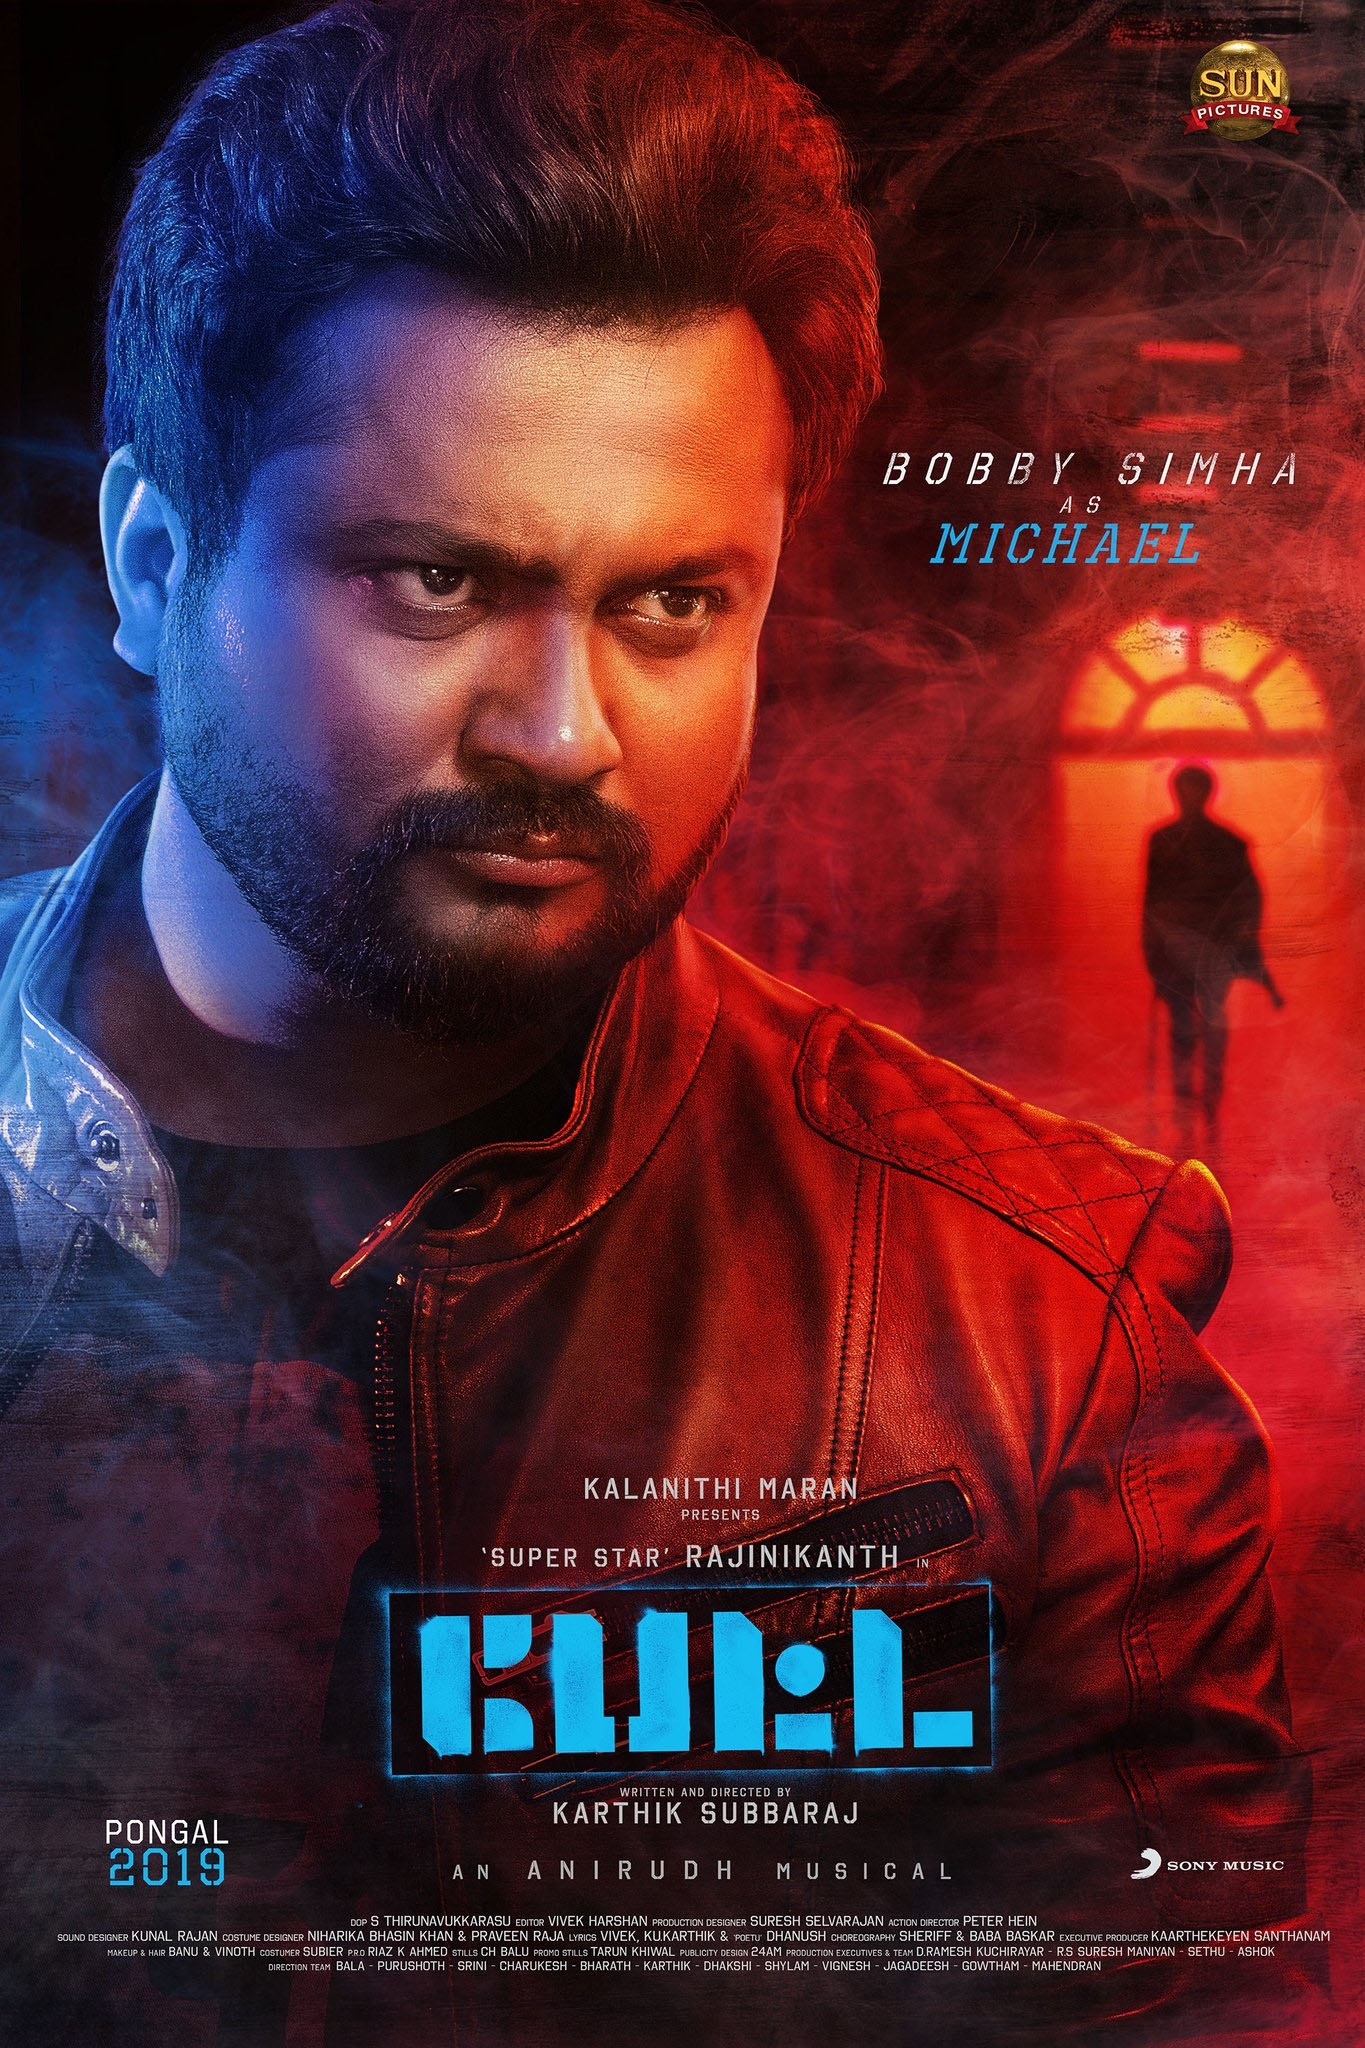 Bobby Simha as Michael in Petta Movie Poster